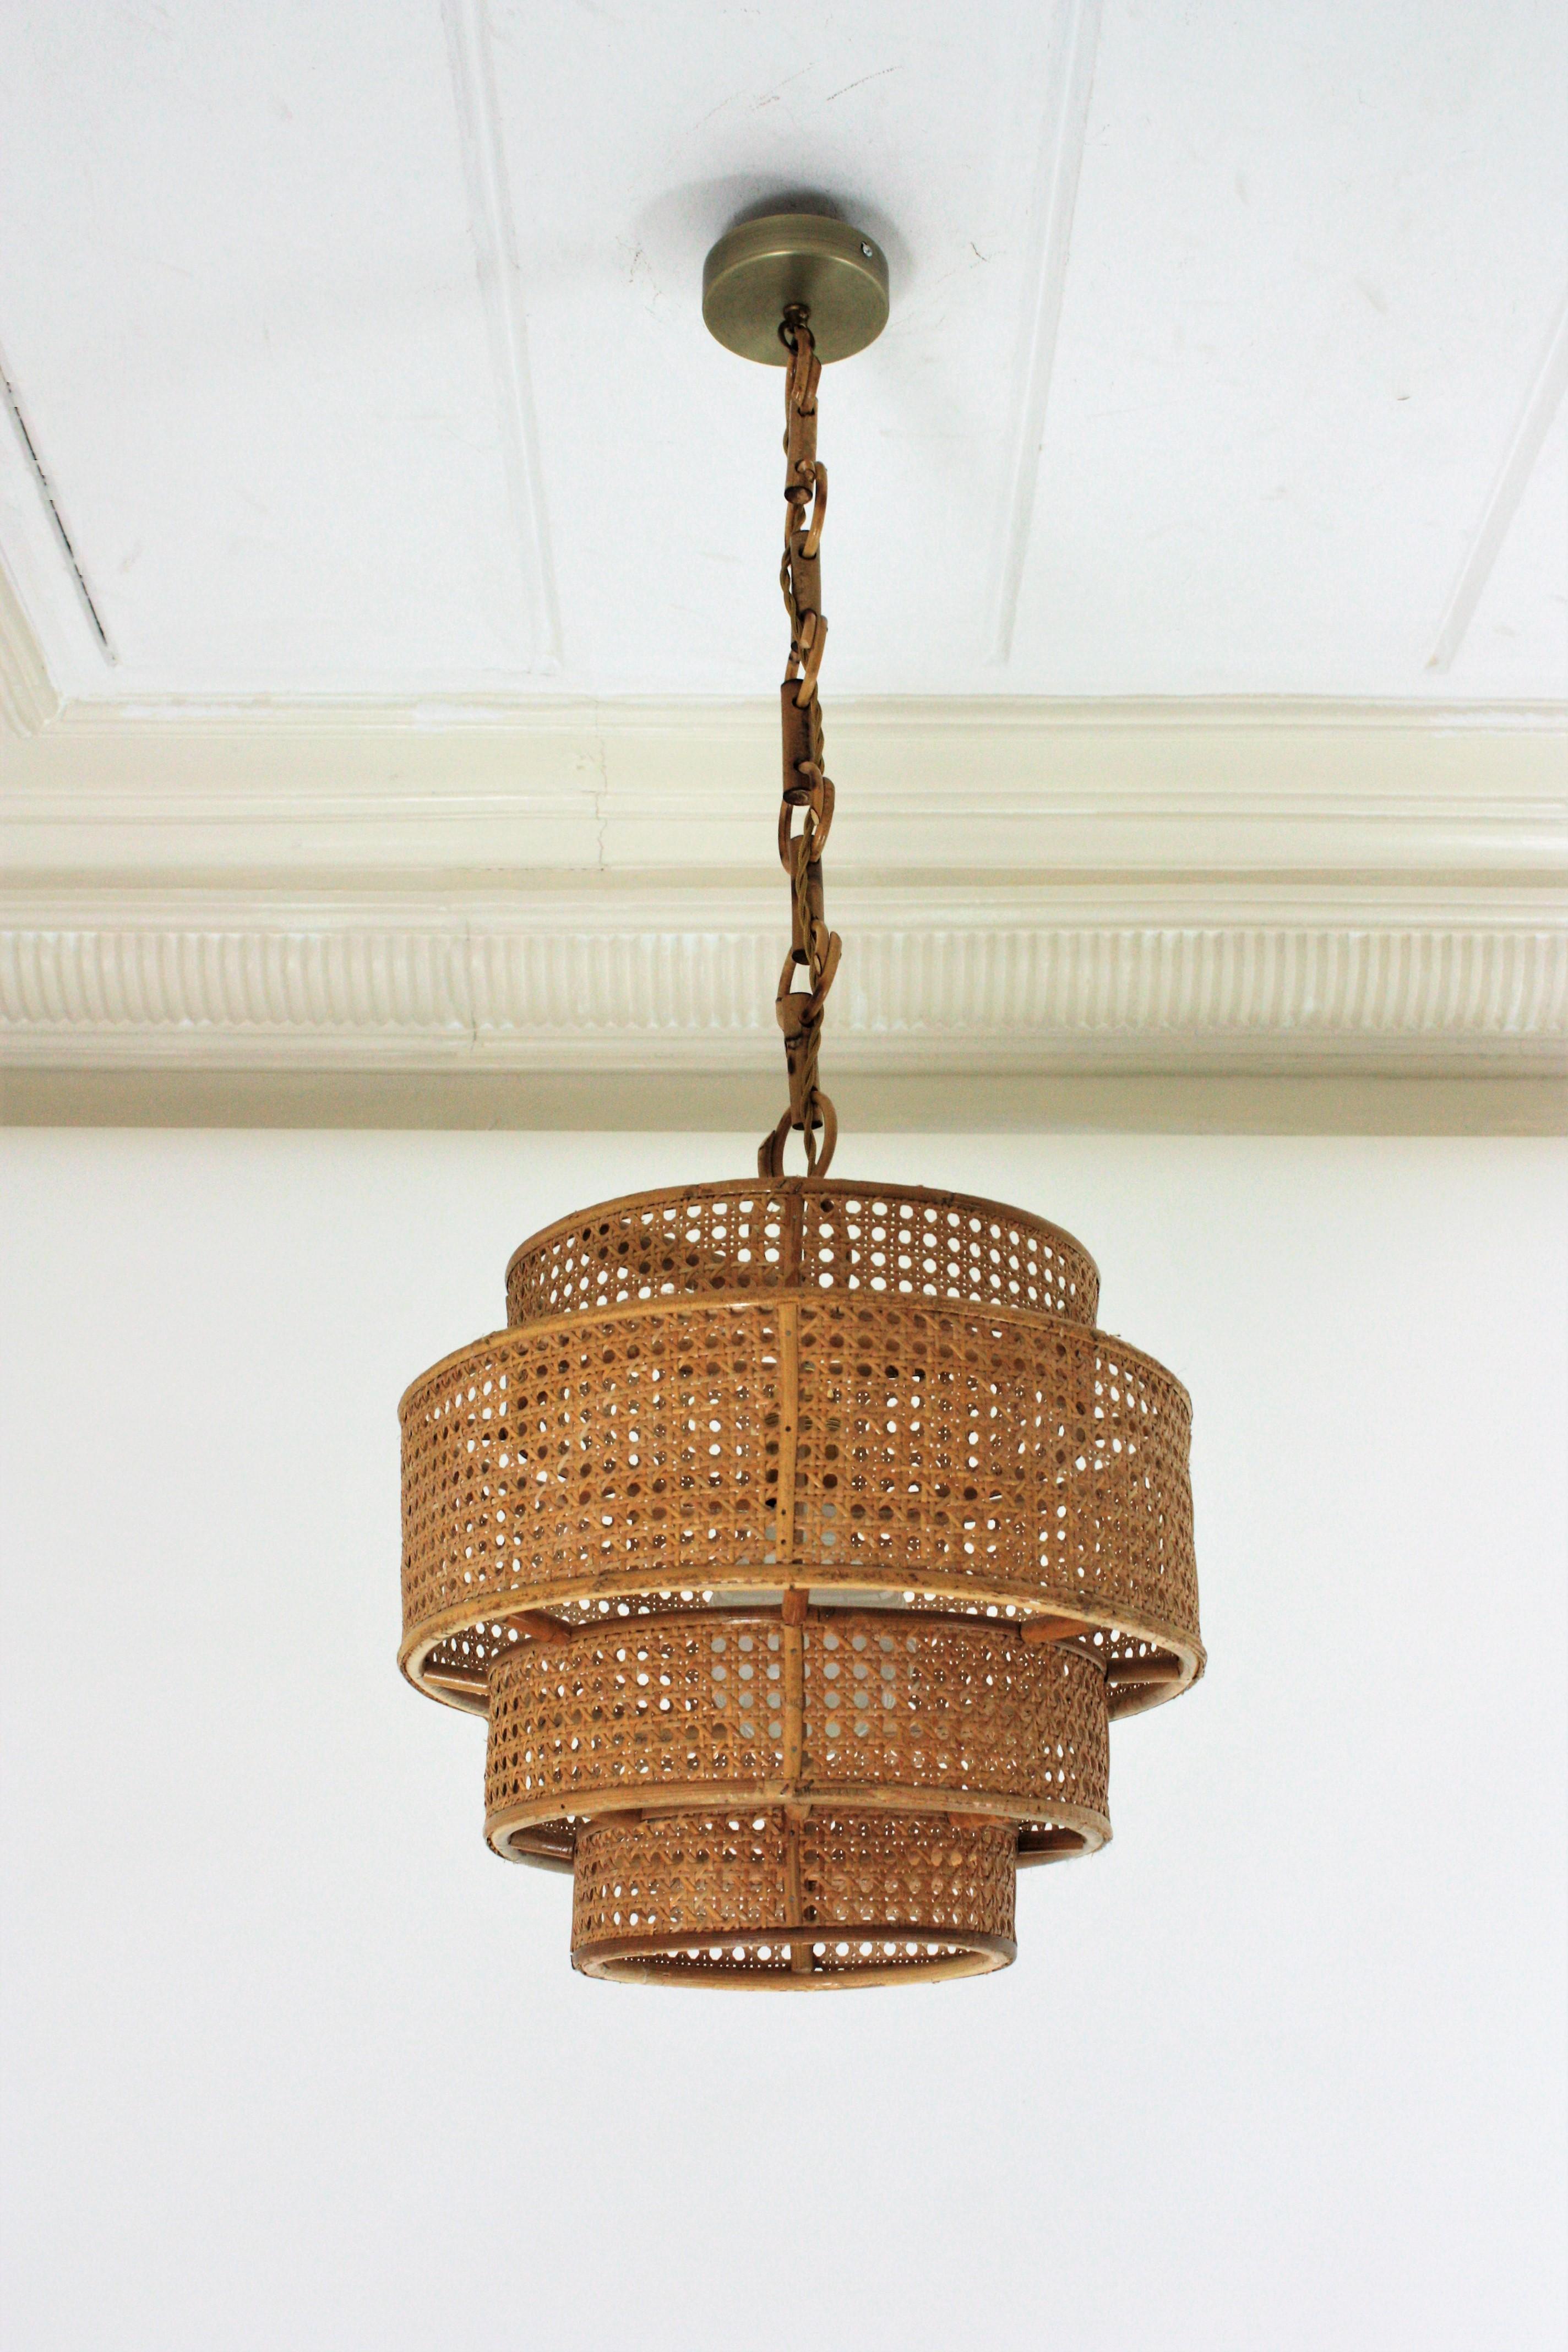 Eye-catching Mid-Century Modern cylinder rattan lantern or pendant ceiling lamp, Italy, 1960s.
This suspension features four concentric cylinders made rattan / wicker wire. The outer cylindrical shade is 34 cm diameter and the smaller inner rattan